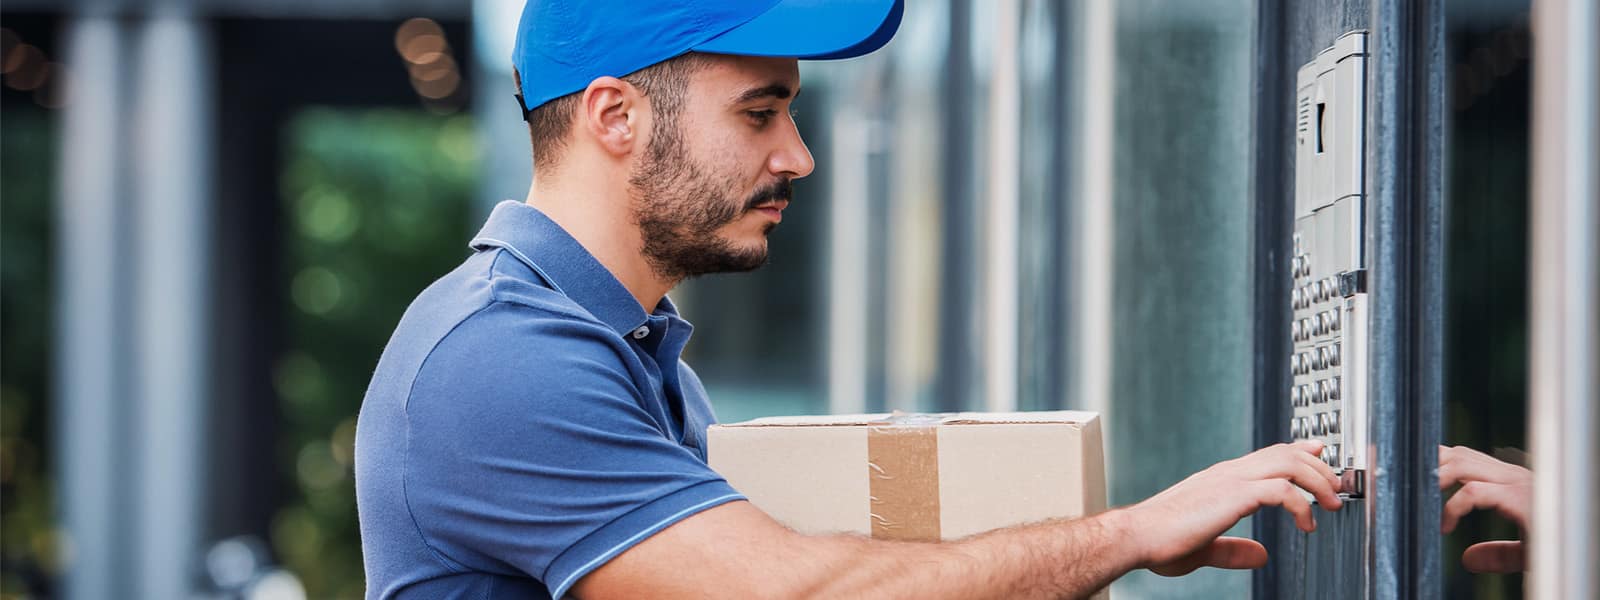 A delivery man with a blue hat and shirt delivering a package